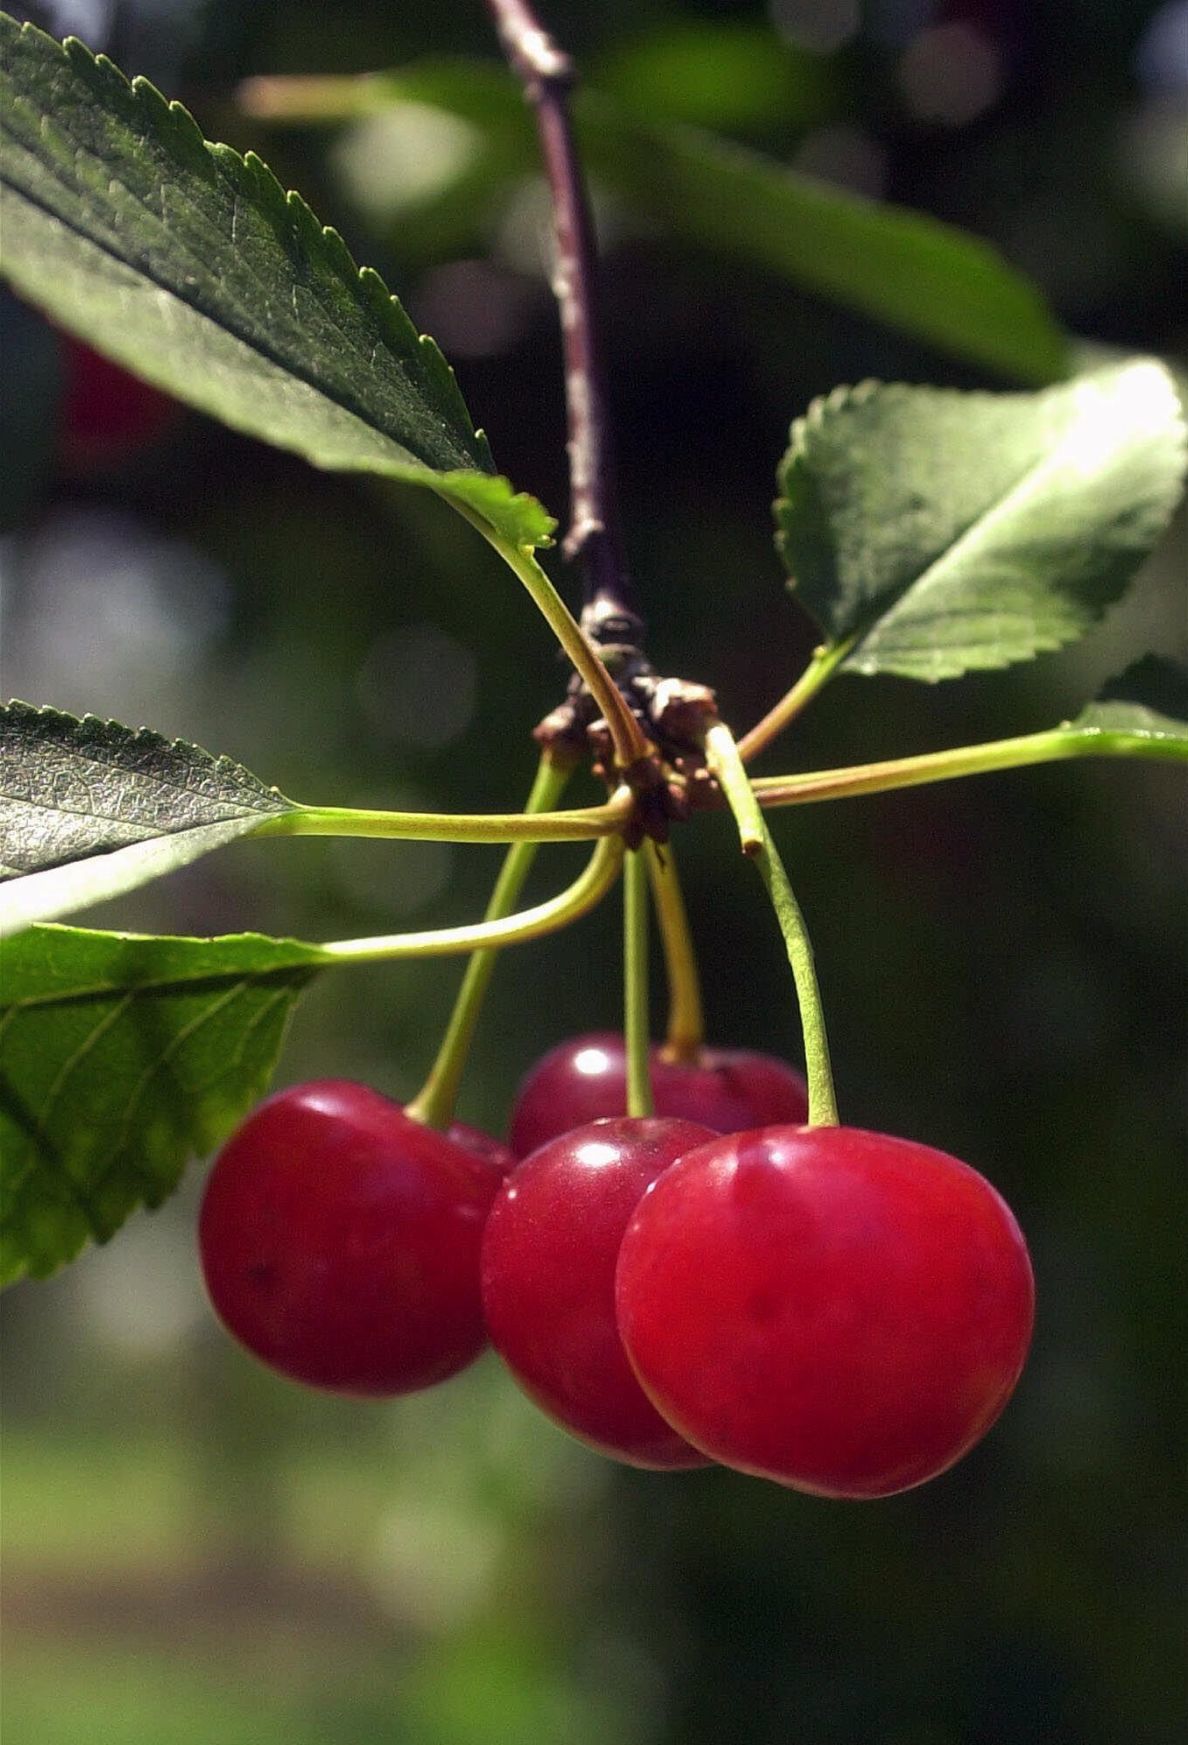 From sweet to tart, cherries you can grow | Lifestyle ...